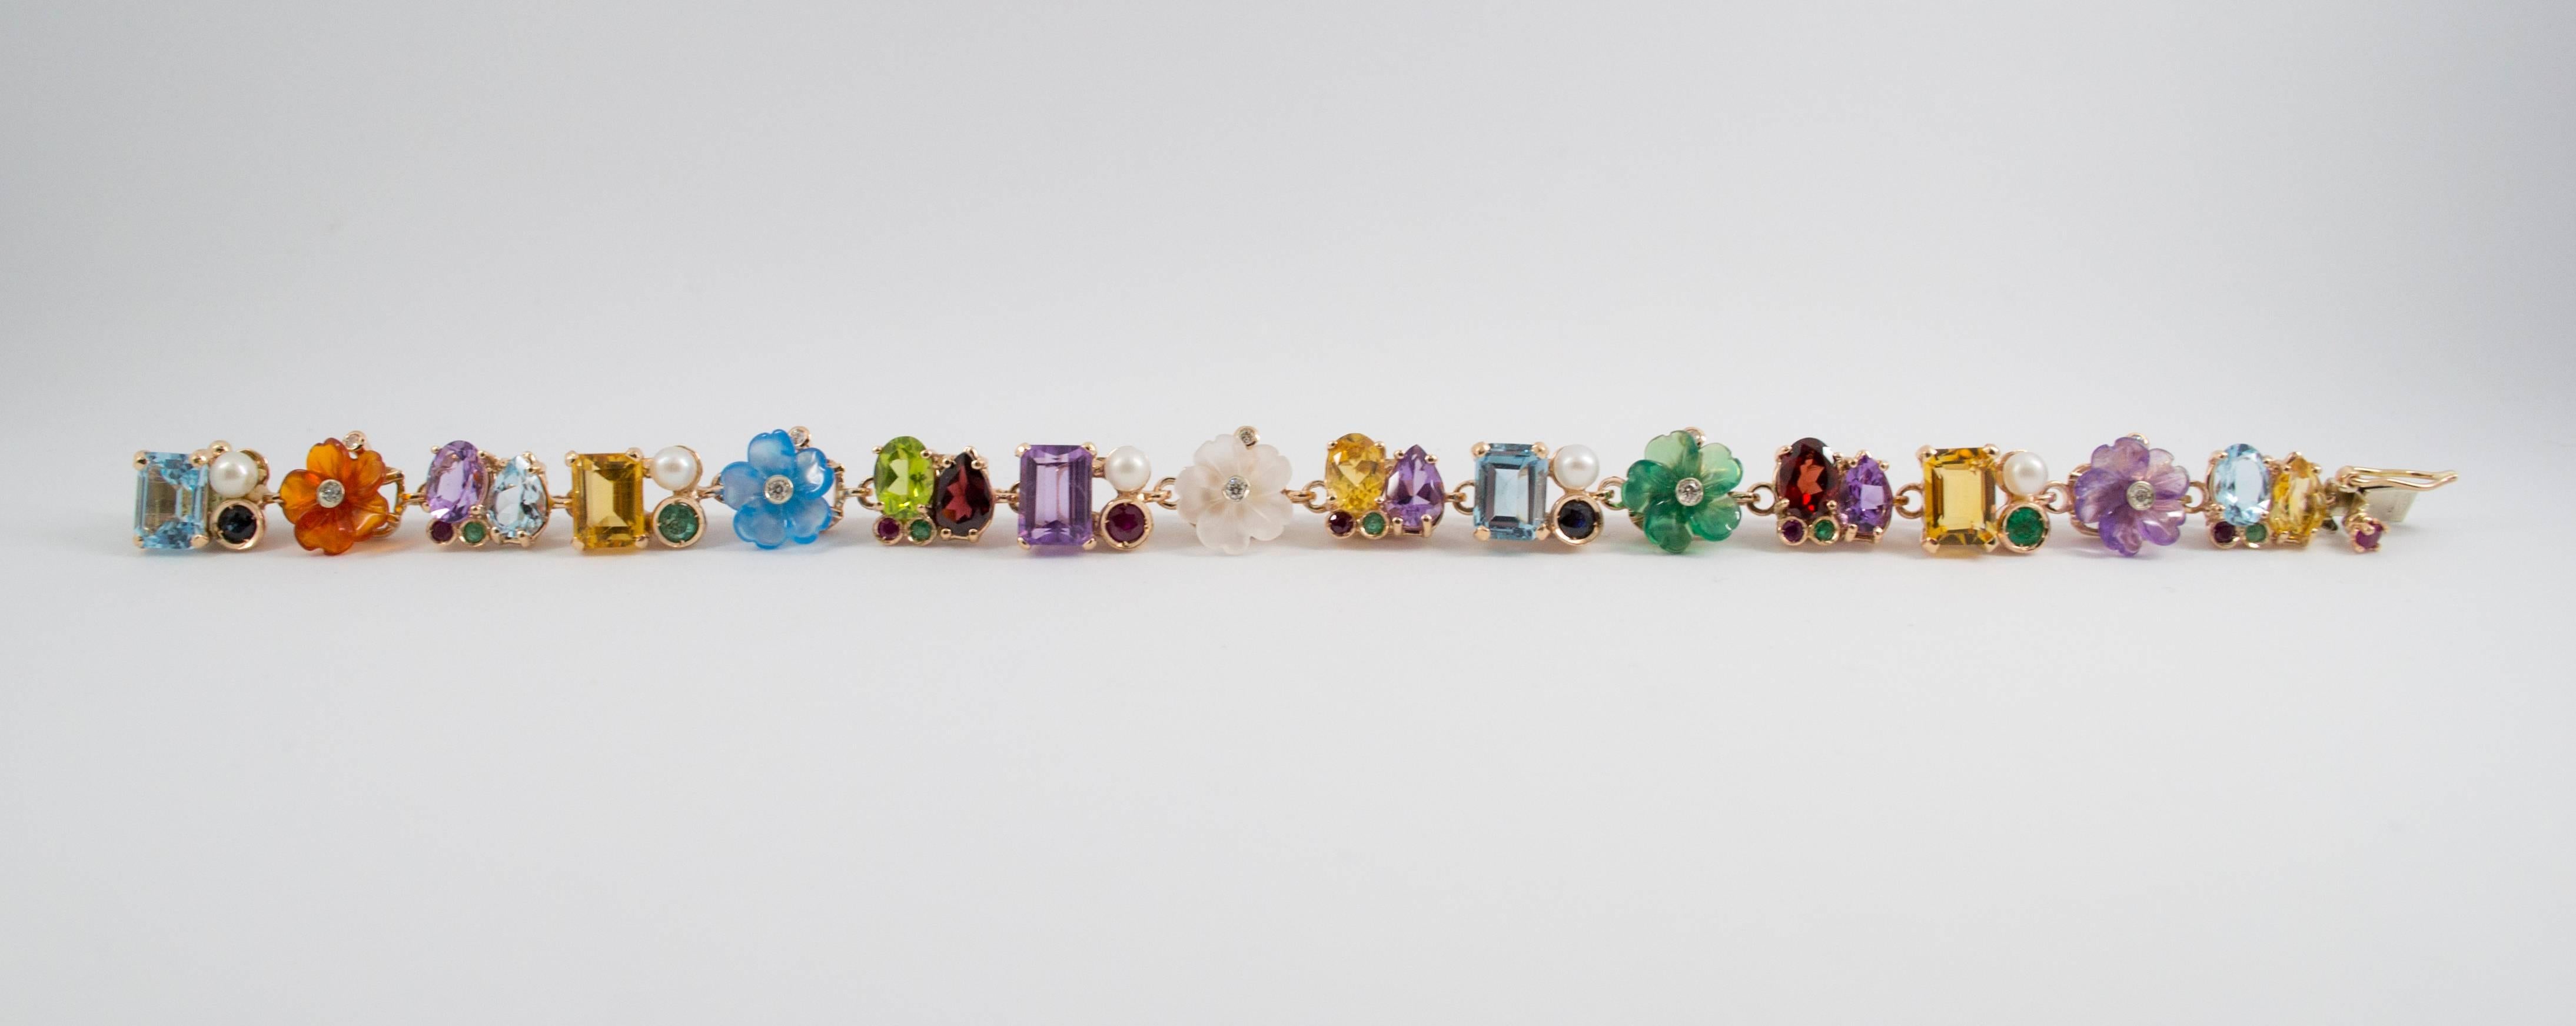 This bracelet is made of 14K Yellow Gold. 
This bracelet has 0.20 Carats of White Diamonds.
This bracelet has 0.80 Carats of Rubies, Emeralds and Blue Sapphires.
This bracelet has also Rock Crystal, Agate, Carnelian, Pearl, Peridot, Amethyst,